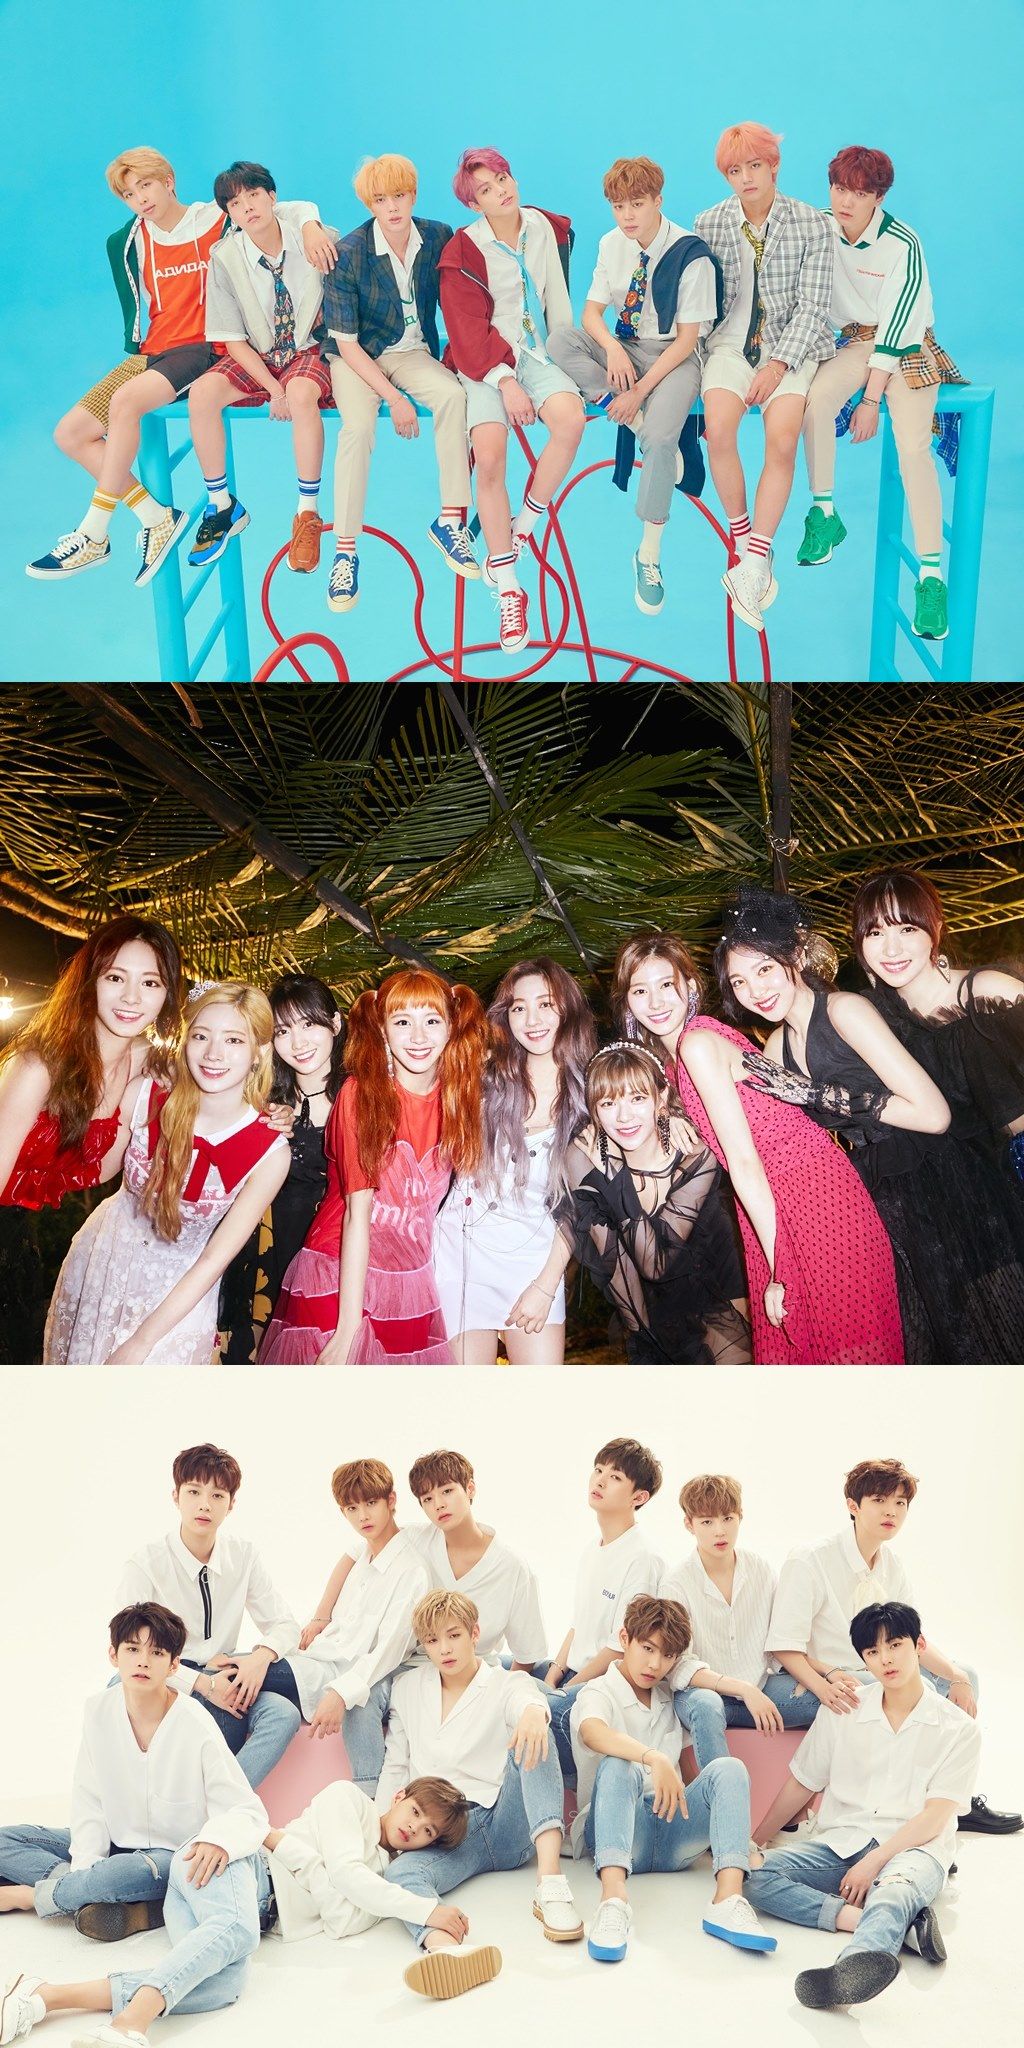 BTS, TWICE and Wanna One have confirmed their attendance at the awards ceremony on November 6, the organizers of the 2018 MBC Plus X Genie Music Awards said on the 9th.The three teams, which are currently the most popular in the K-POP scene, have been nominated for the 2018 MGA.They will present a stage of the past that will give the audience the elasticity.According to the 2018 MGA competition category candidate lineup released on the Genie Music website on the 1st, BTS has four categories (Singer of the Year, Song of the Year, Best Selling The Artist of the Year, Digital Album of the Year), Wanna One (Singer of the Year, Song of the Year, Digital Album of the Year) and TWICE (Digital Album of the Year) Singer of the Year, Song of the Year, and Best Selling The Artist of the Year) are also nominated for three categories each.Meanwhile, the 2018 MGA, a K-POP award co-hosted by MBC Plus (MBC PLUS) and Genie Music, is the first ever to be held at a collaboration awards ceremony for broadcasters and music platform companies, and the list of candidates for each category can be found on the Genie Music website.The online Voting will be held until the 31st of this month. It will be held on November 6th at the Namdong Gymnasium in Incheon.